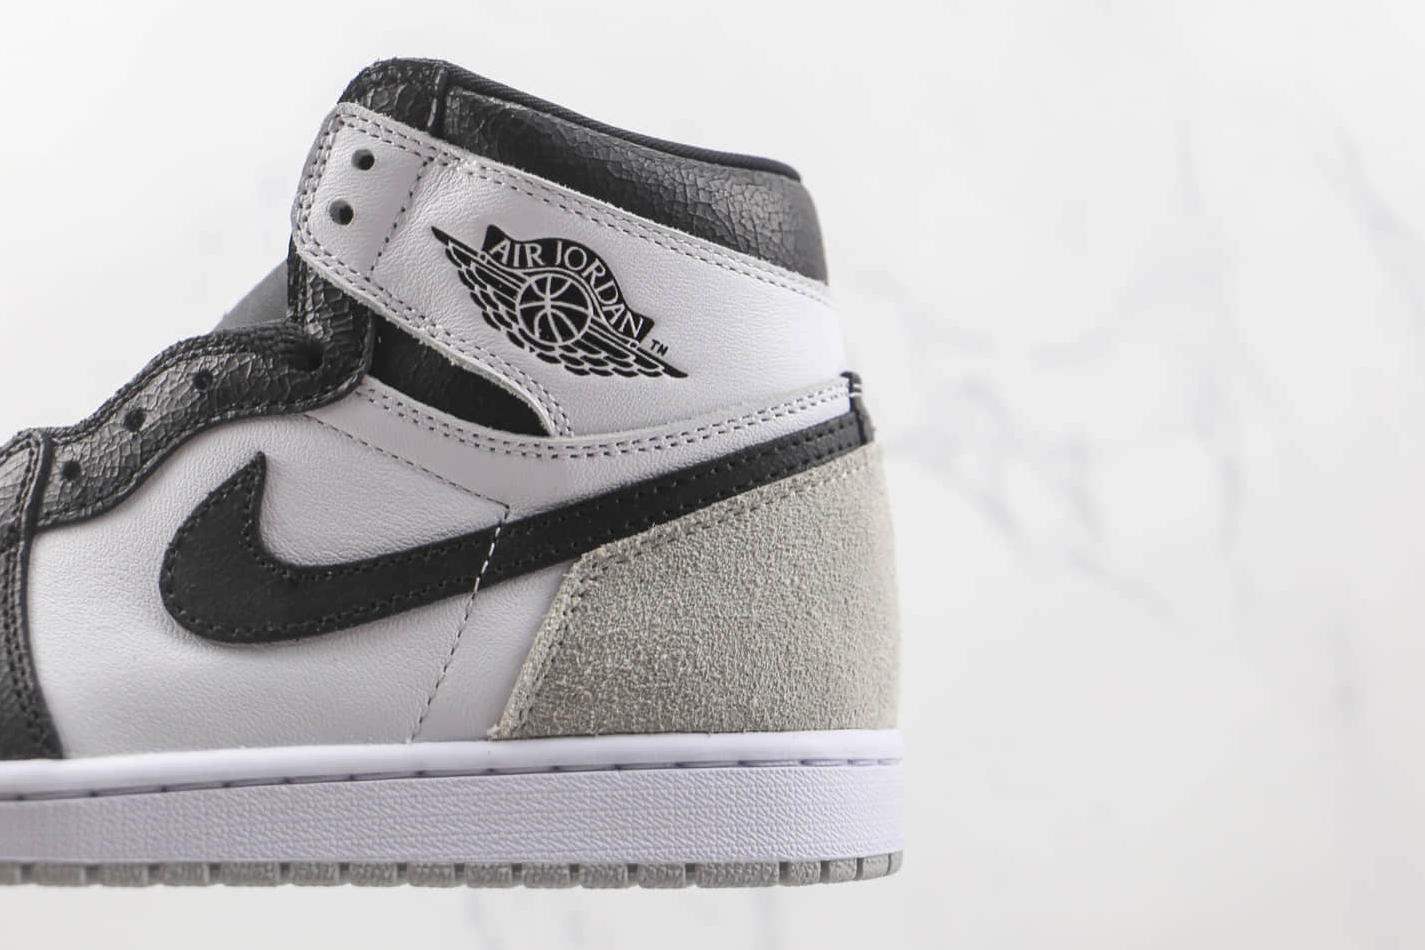 Air Jordan 1 Retro High OG 'Stage Haze' 555088-108 - Iconic Sneakers in Limited Edition